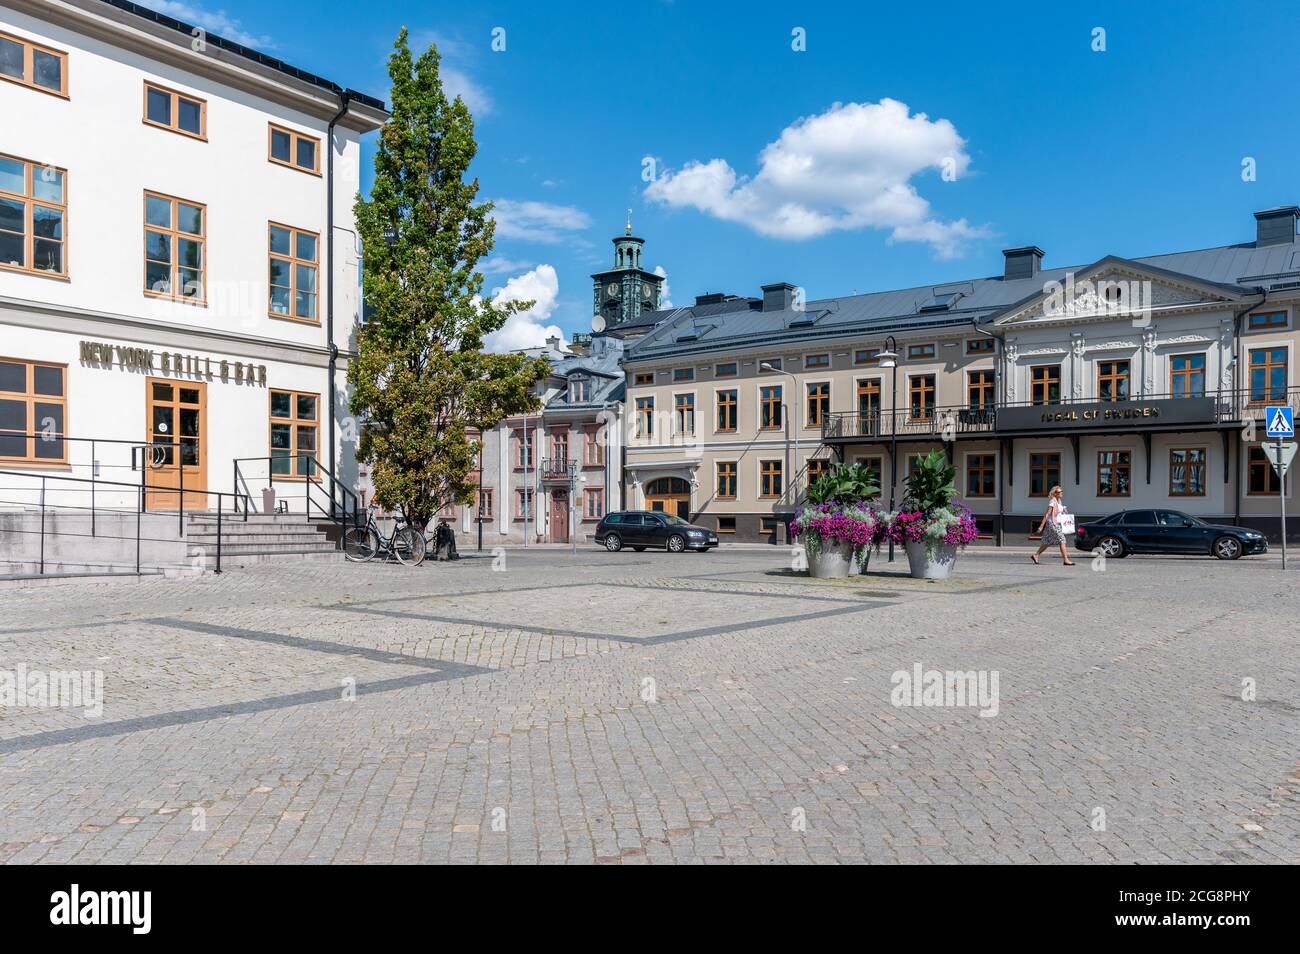 Old buildings at the Old Square in Norrkoping. Norrkoping is a historic industrial town in Sweden. Stock Photo